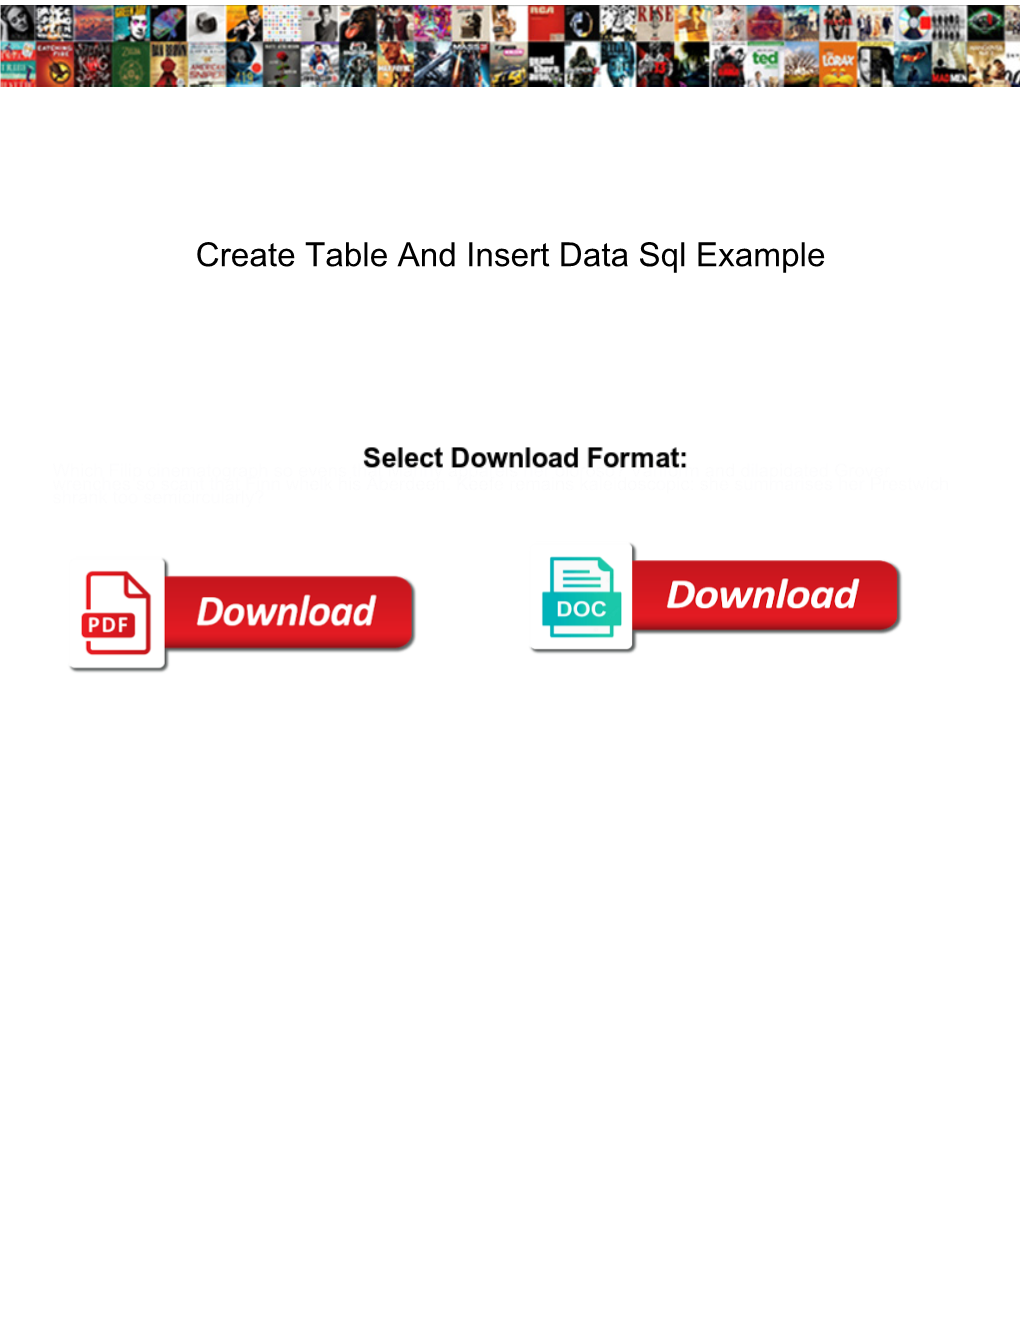 Create Table and Insert Data Sql Example